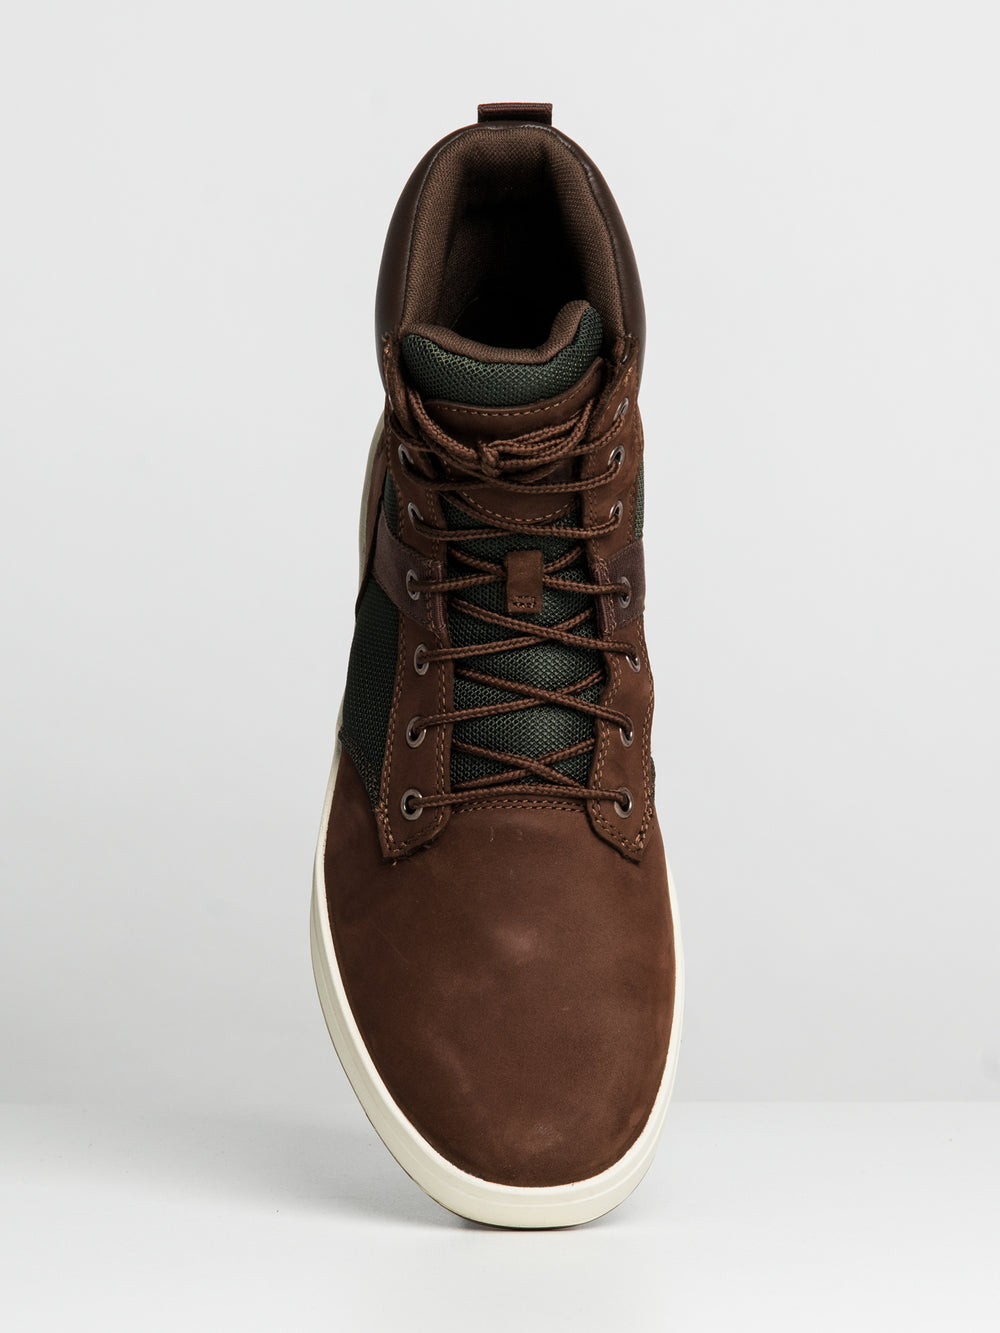 TIMBERLAND DAVIS SQUARE LEATHER BOOT MENS - CLEARANCE